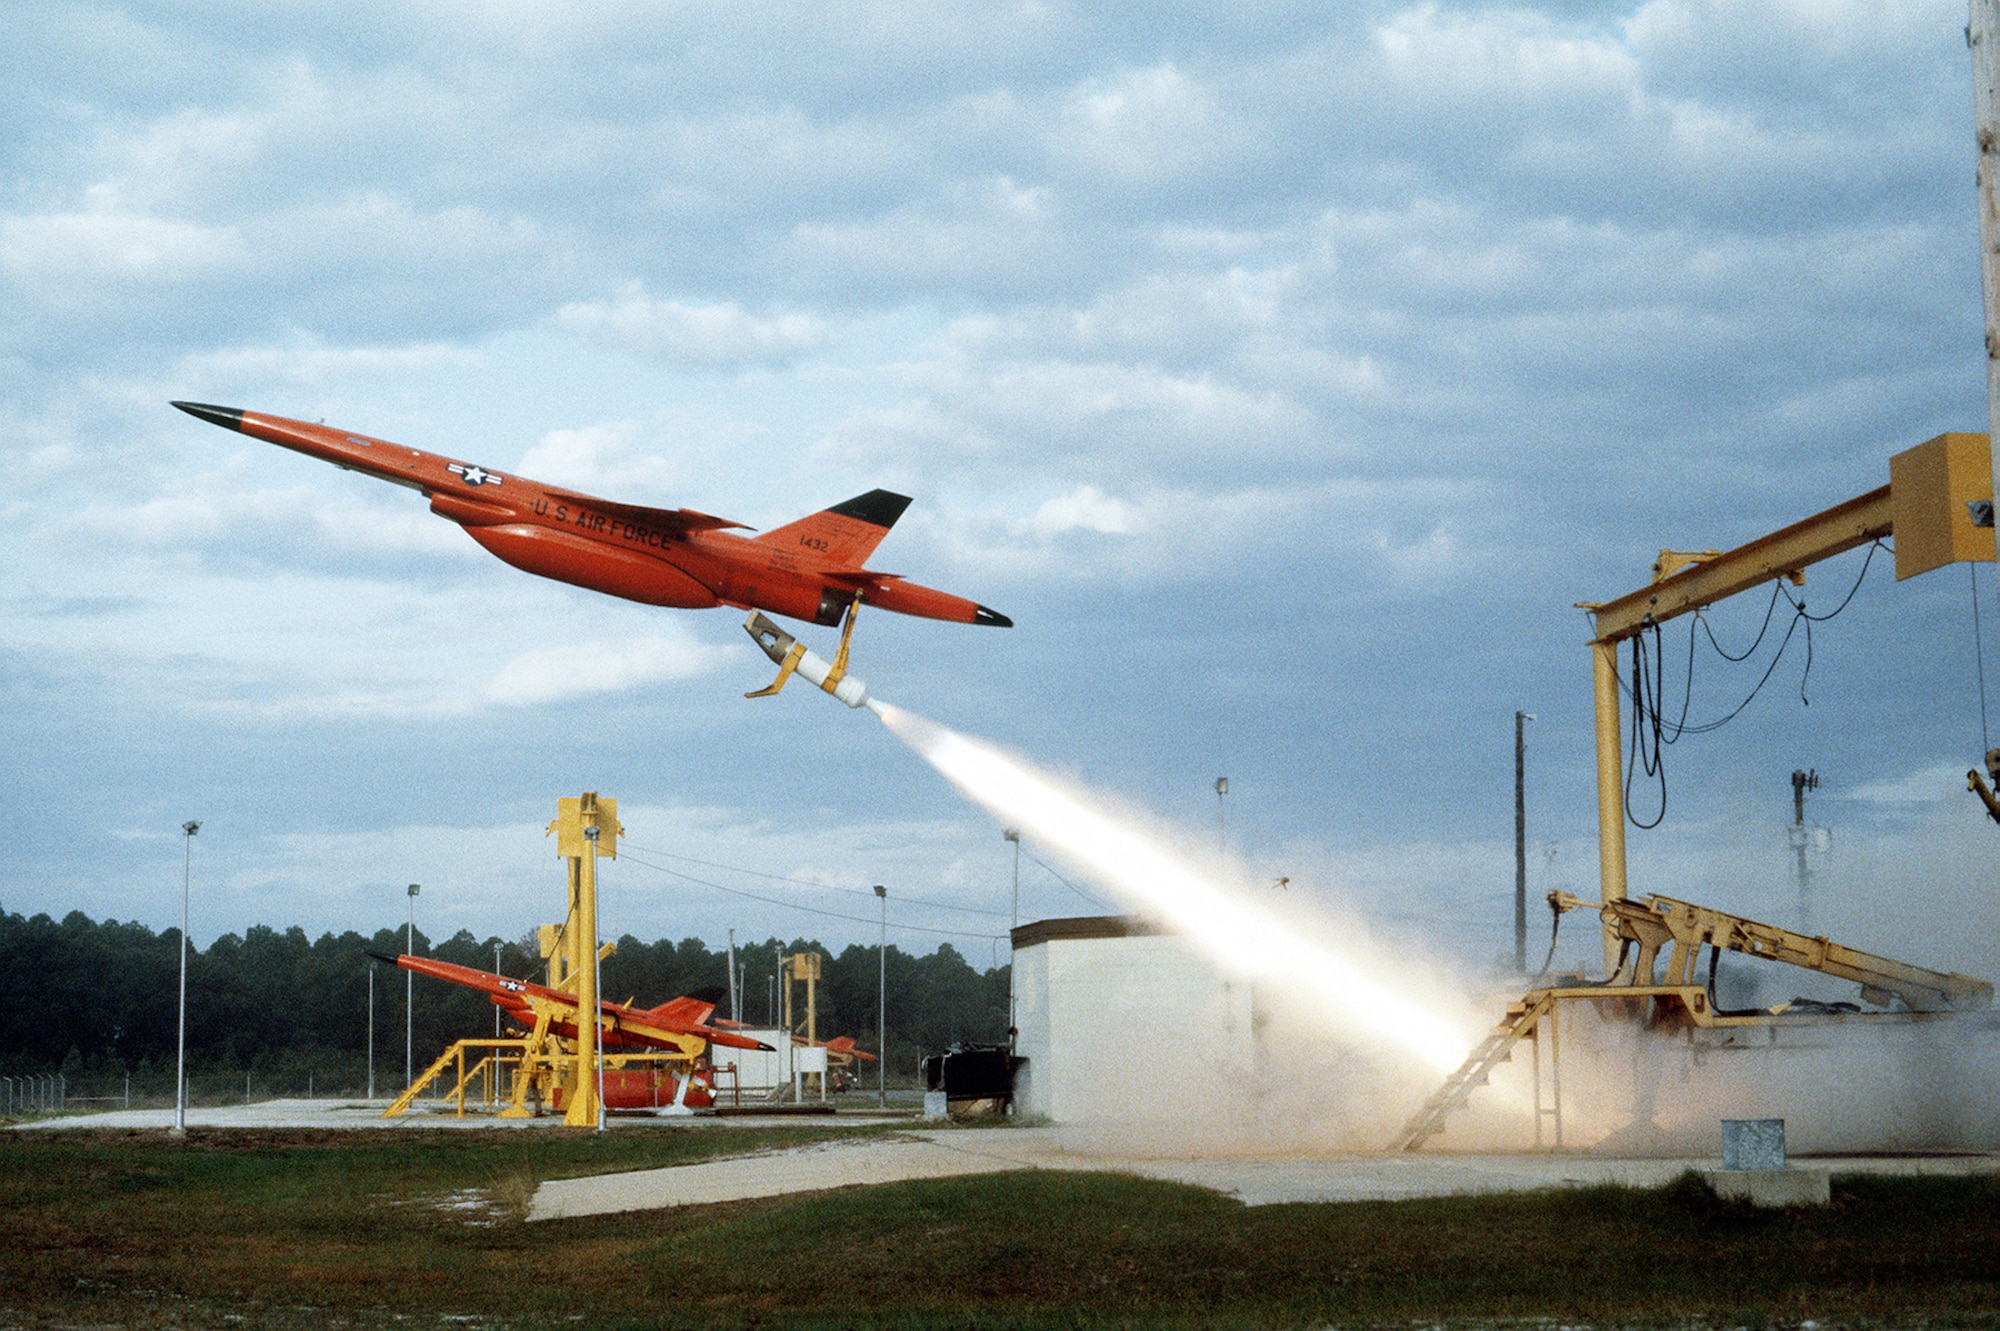 Ryan BQM-34F Firebee II target leaves its launch pad during an air-to-air combat training exercise in 1982, while another stands ready for launch in the background. (U.S. Air Force photo)